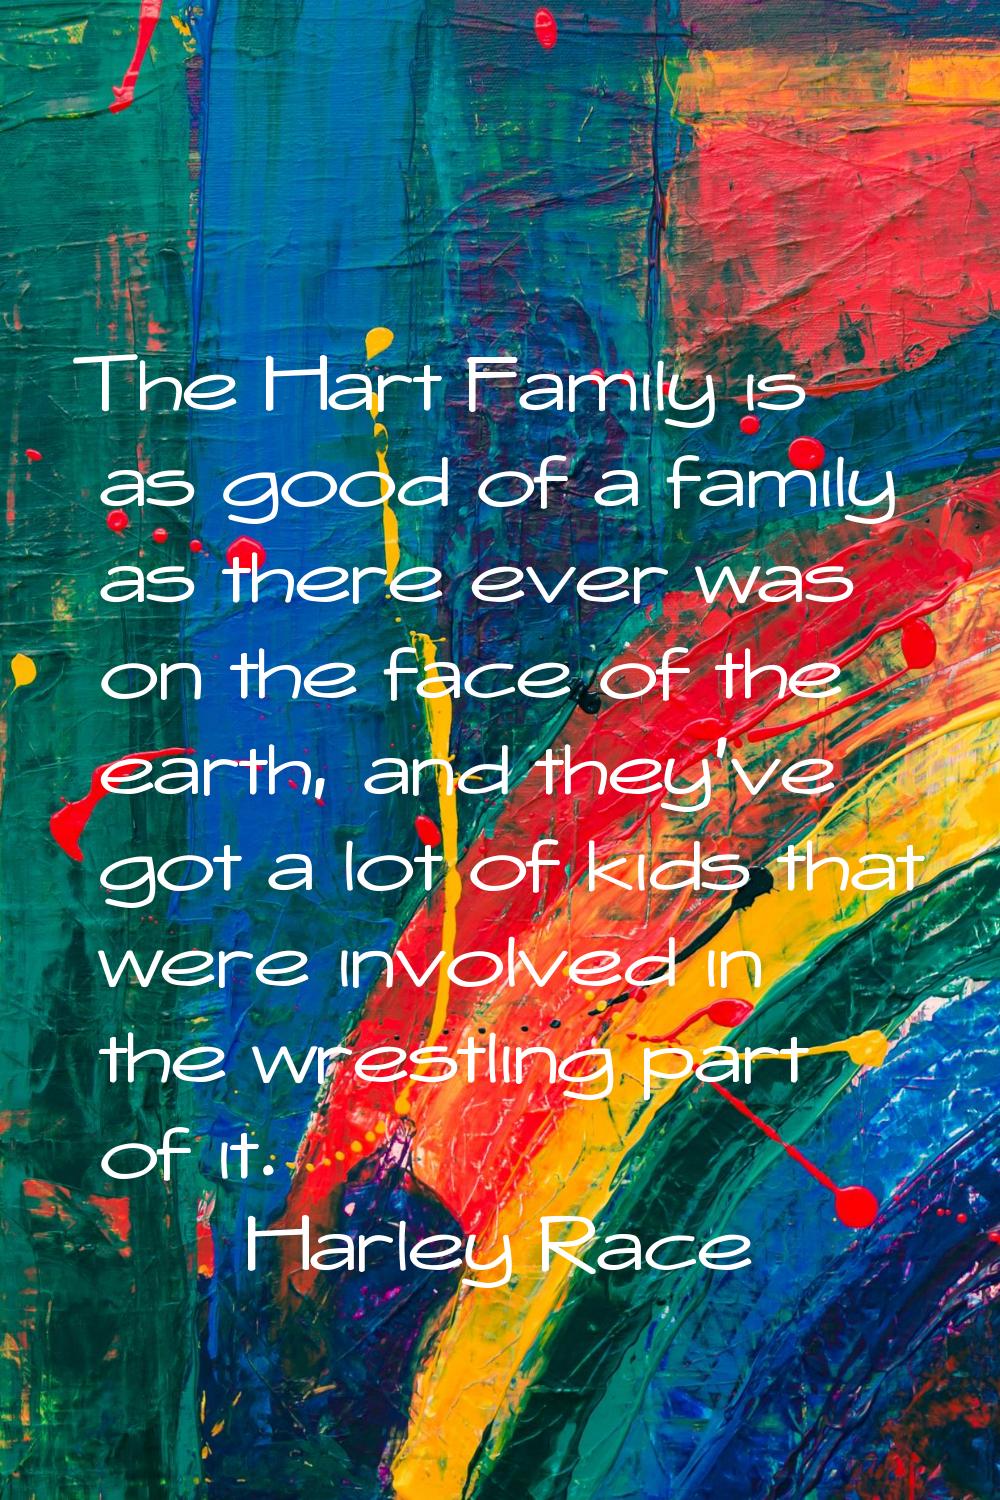 The Hart Family is as good of a family as there ever was on the face of the earth, and they've got 